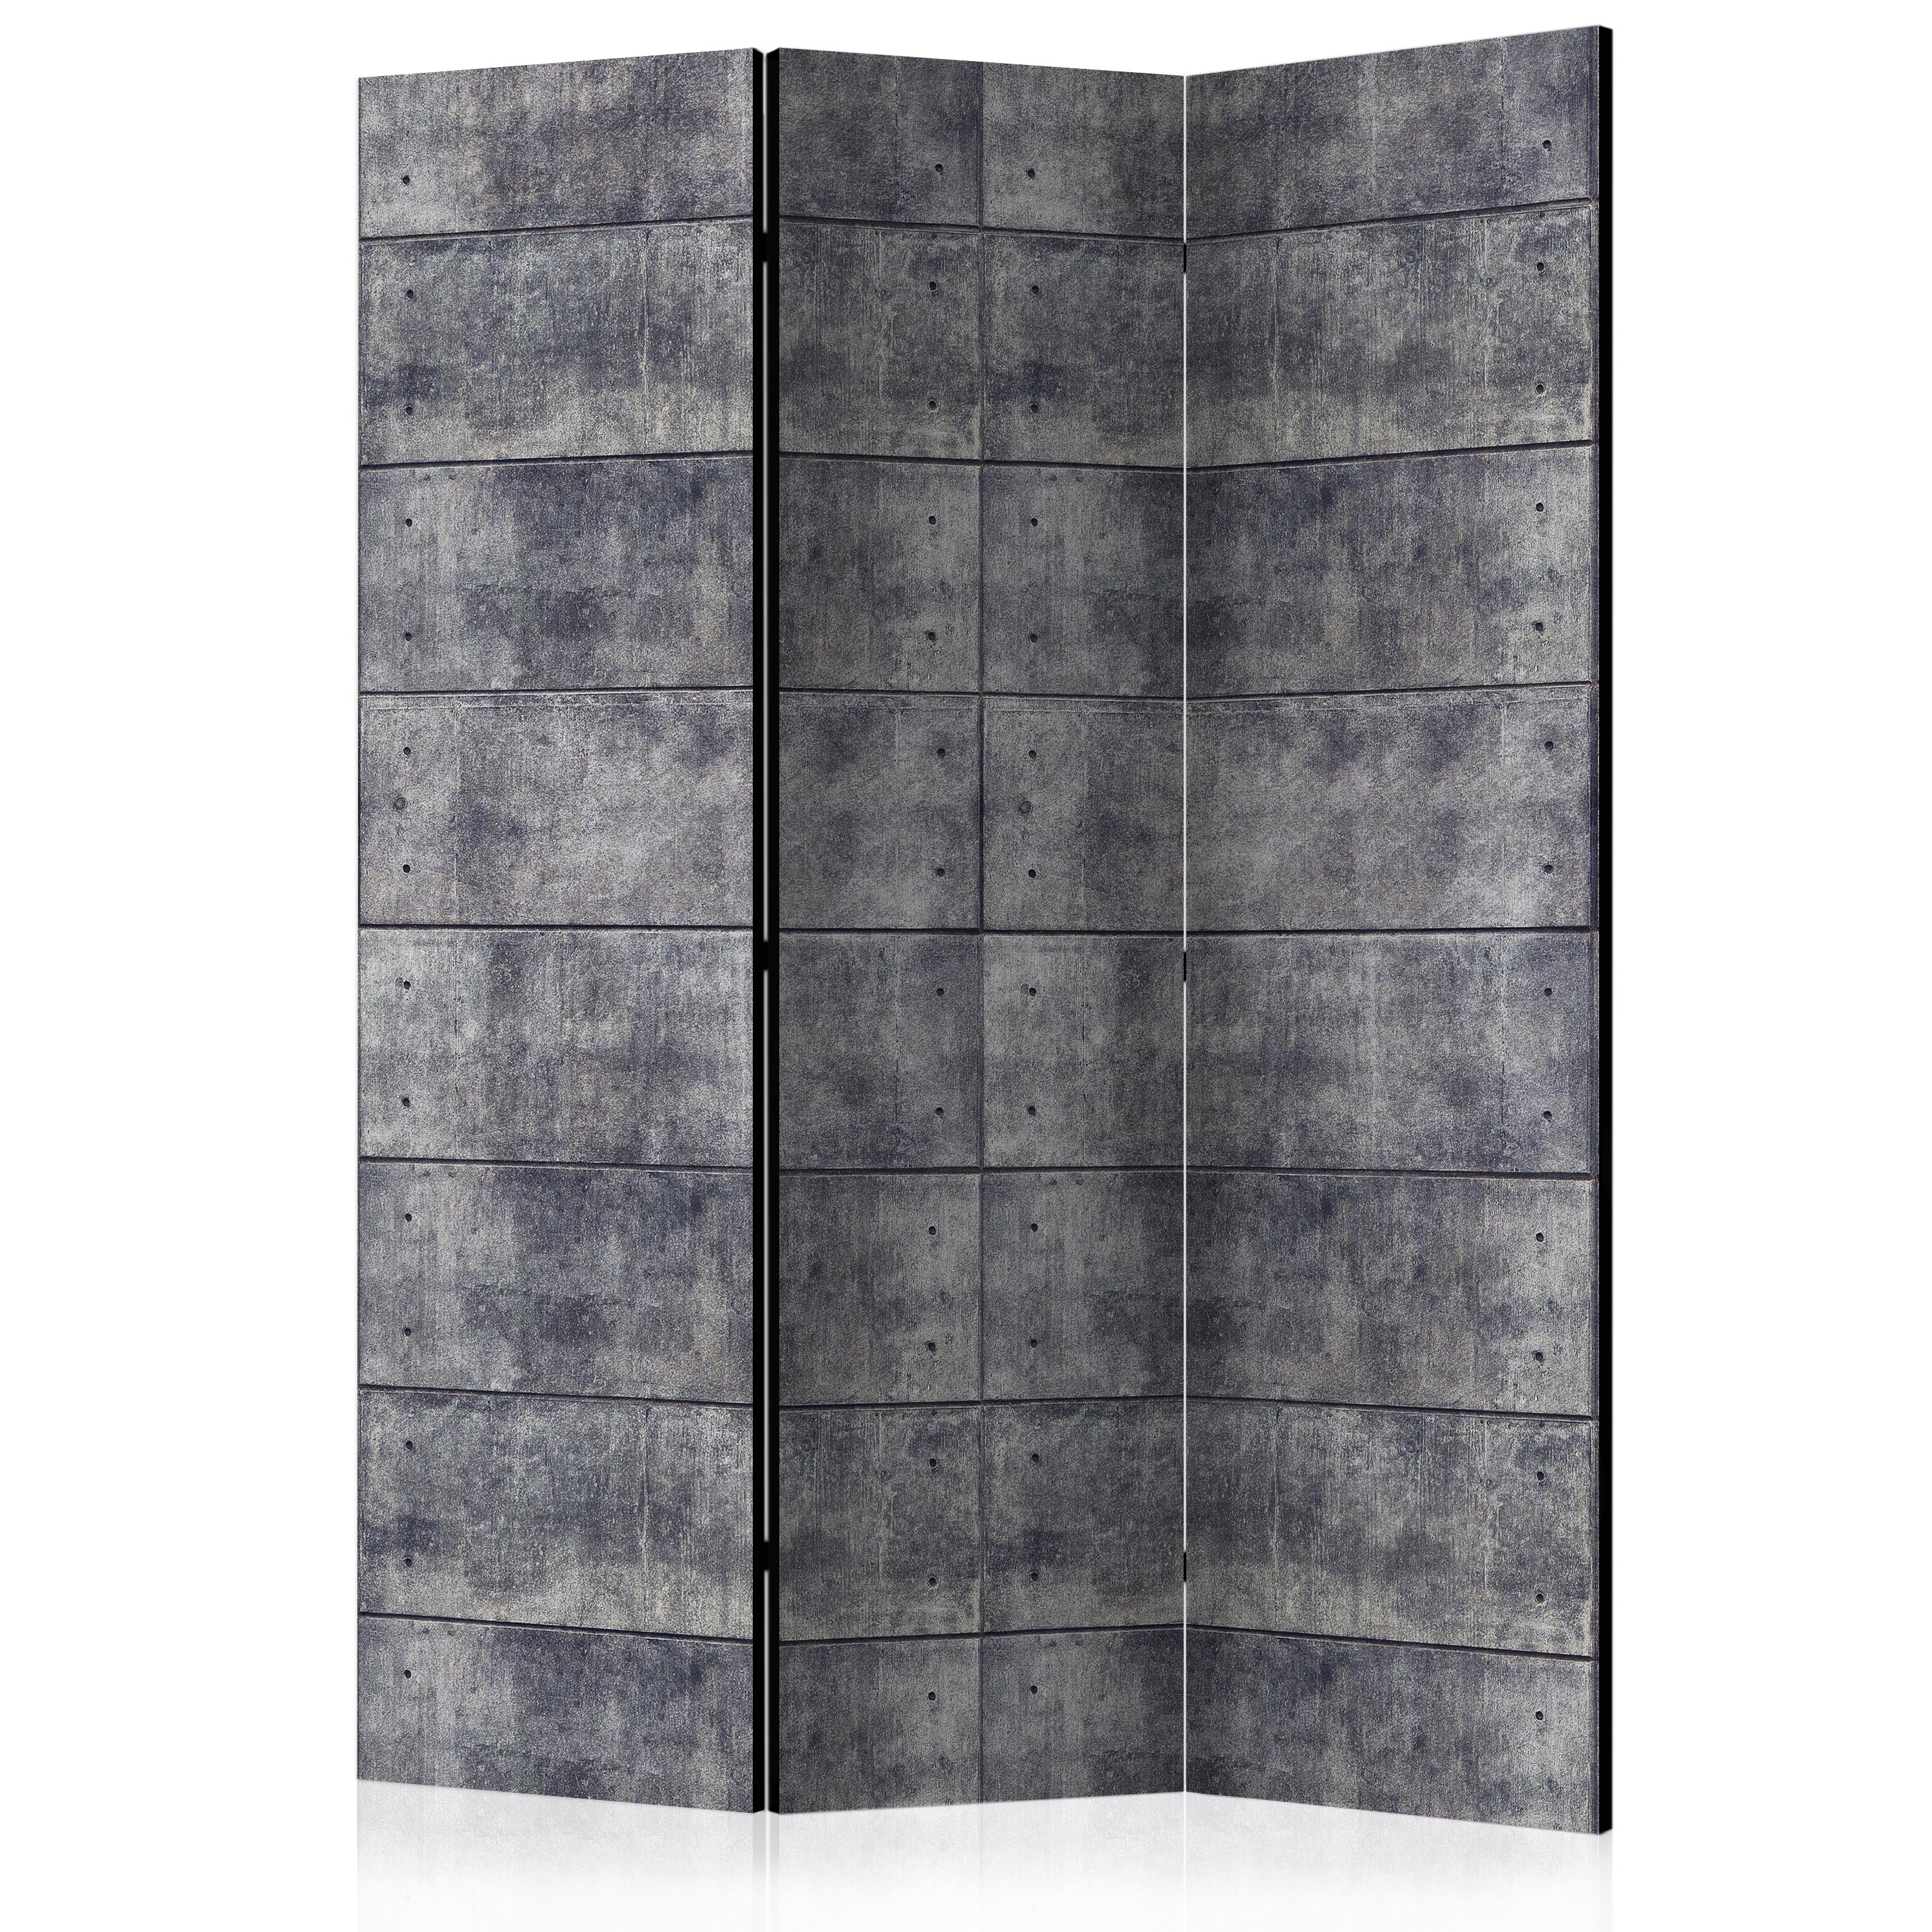 Room Divider - Concrete Fortress [Room Dividers] - 135x172